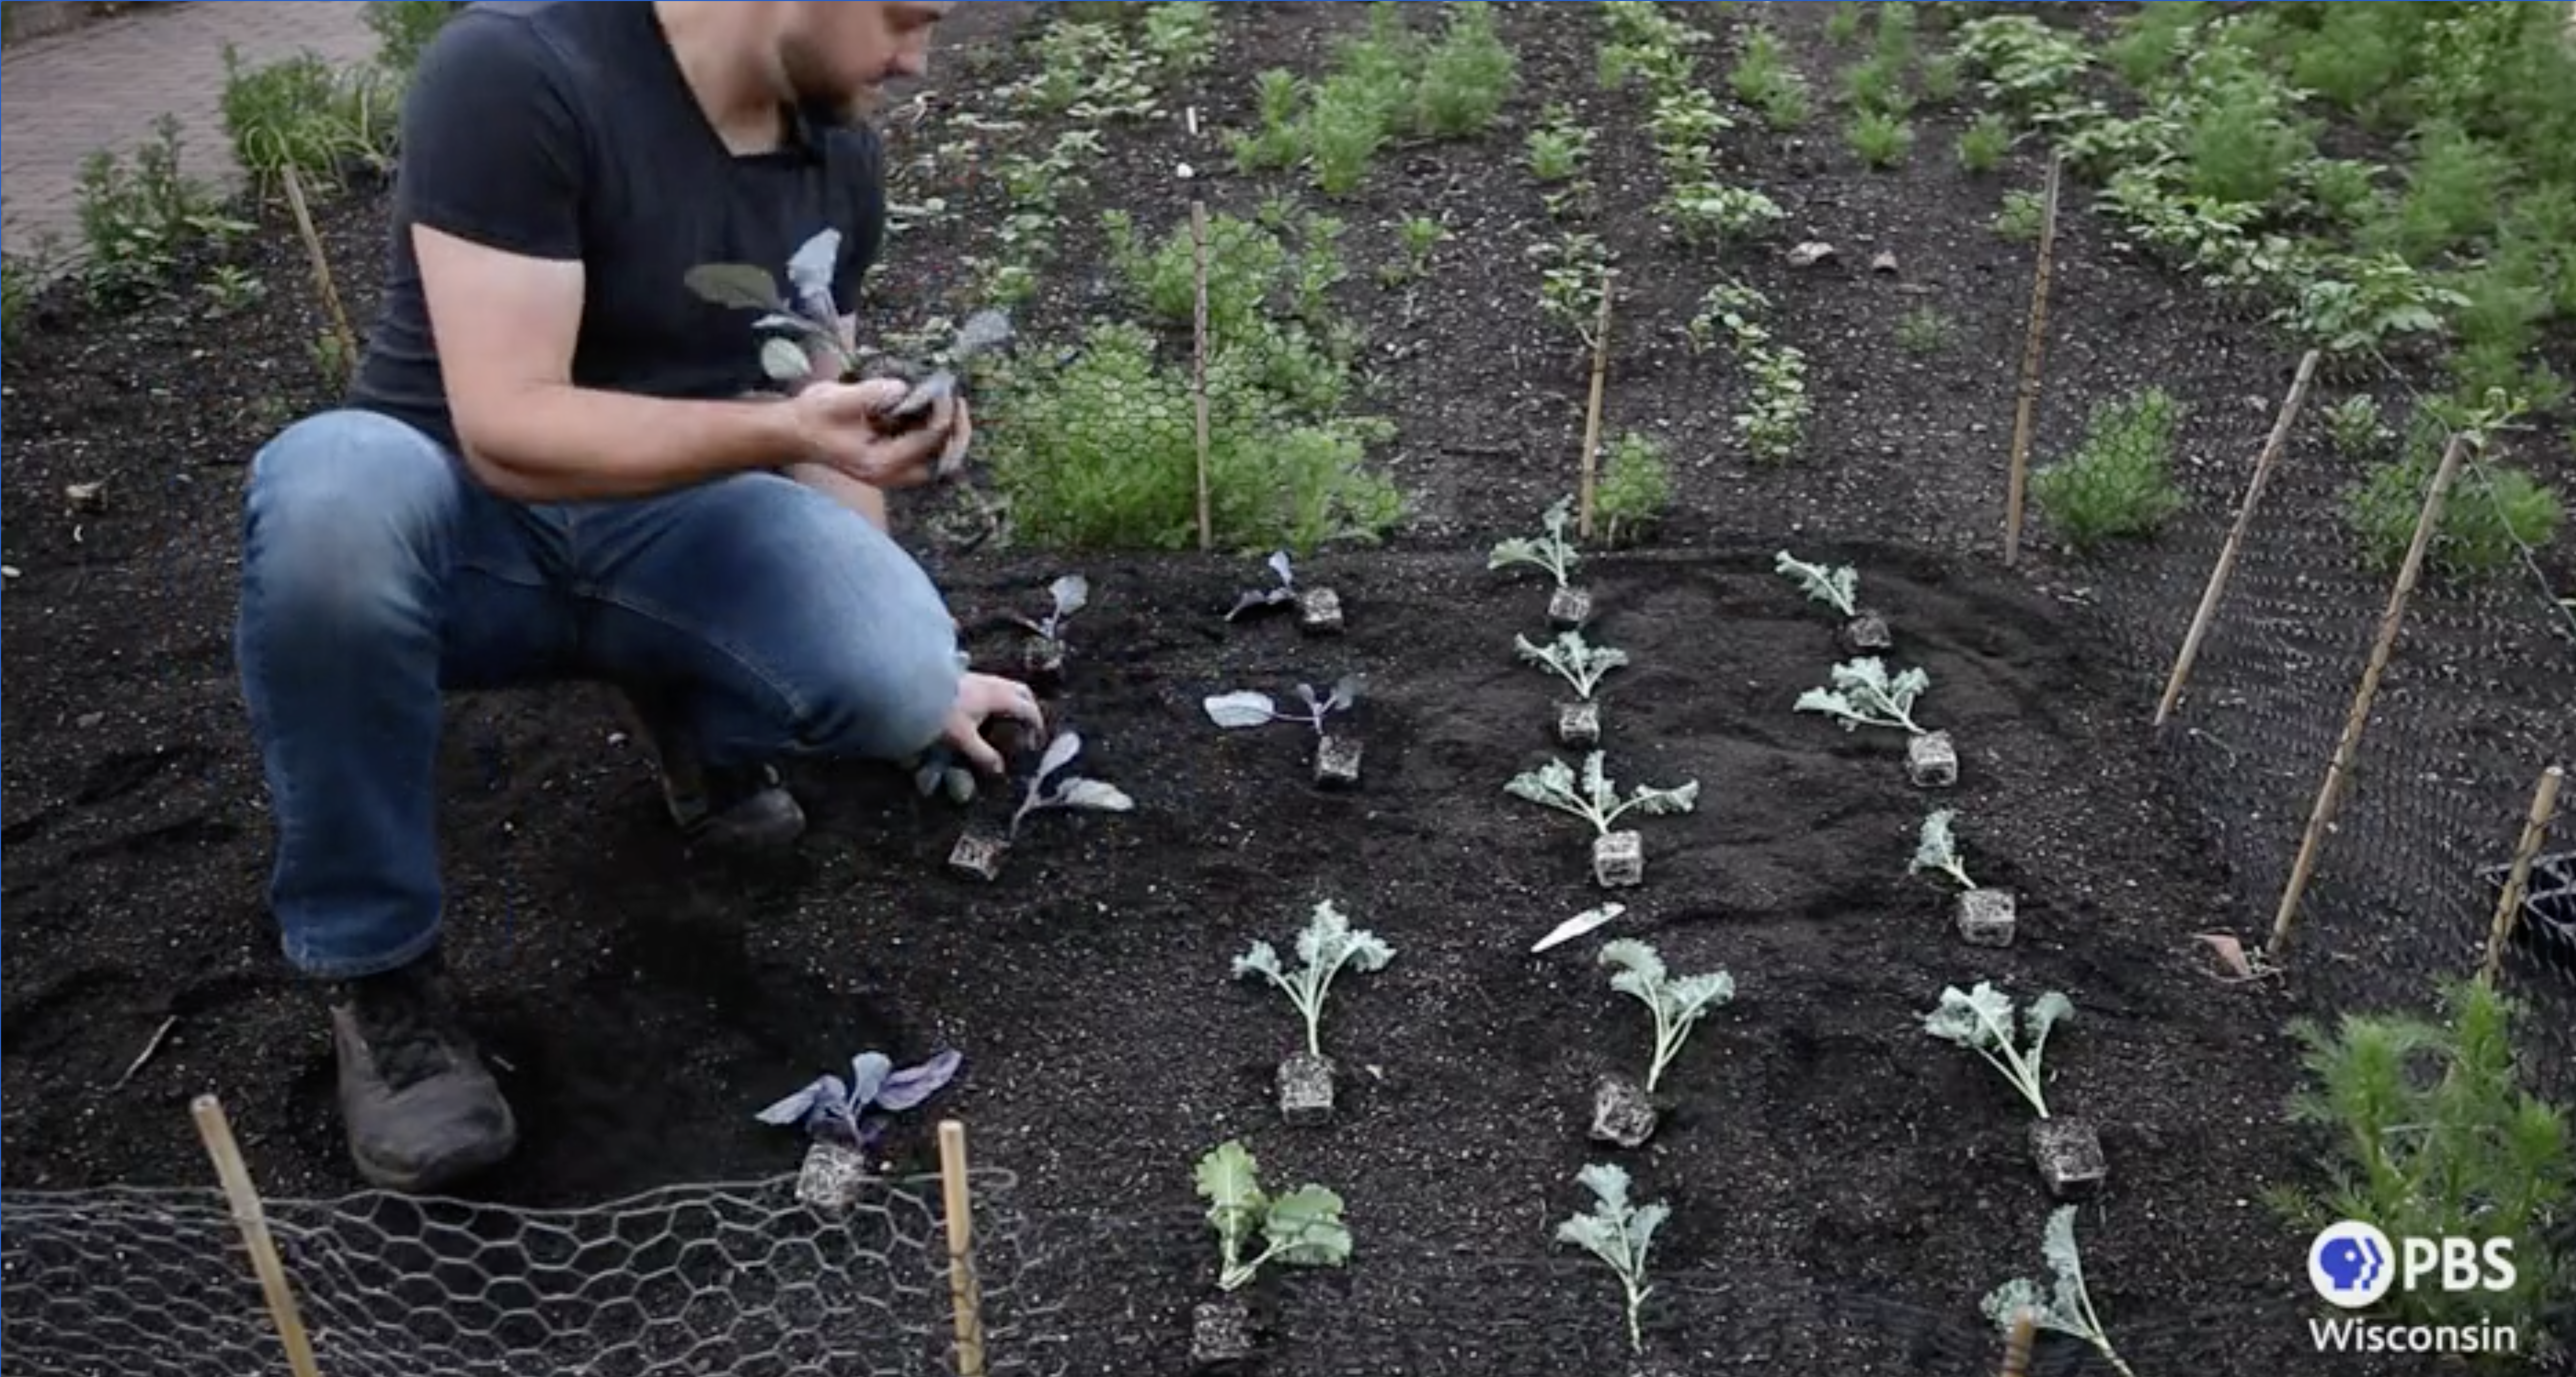 man kneeling in garden with plant starts of kale and cabbage